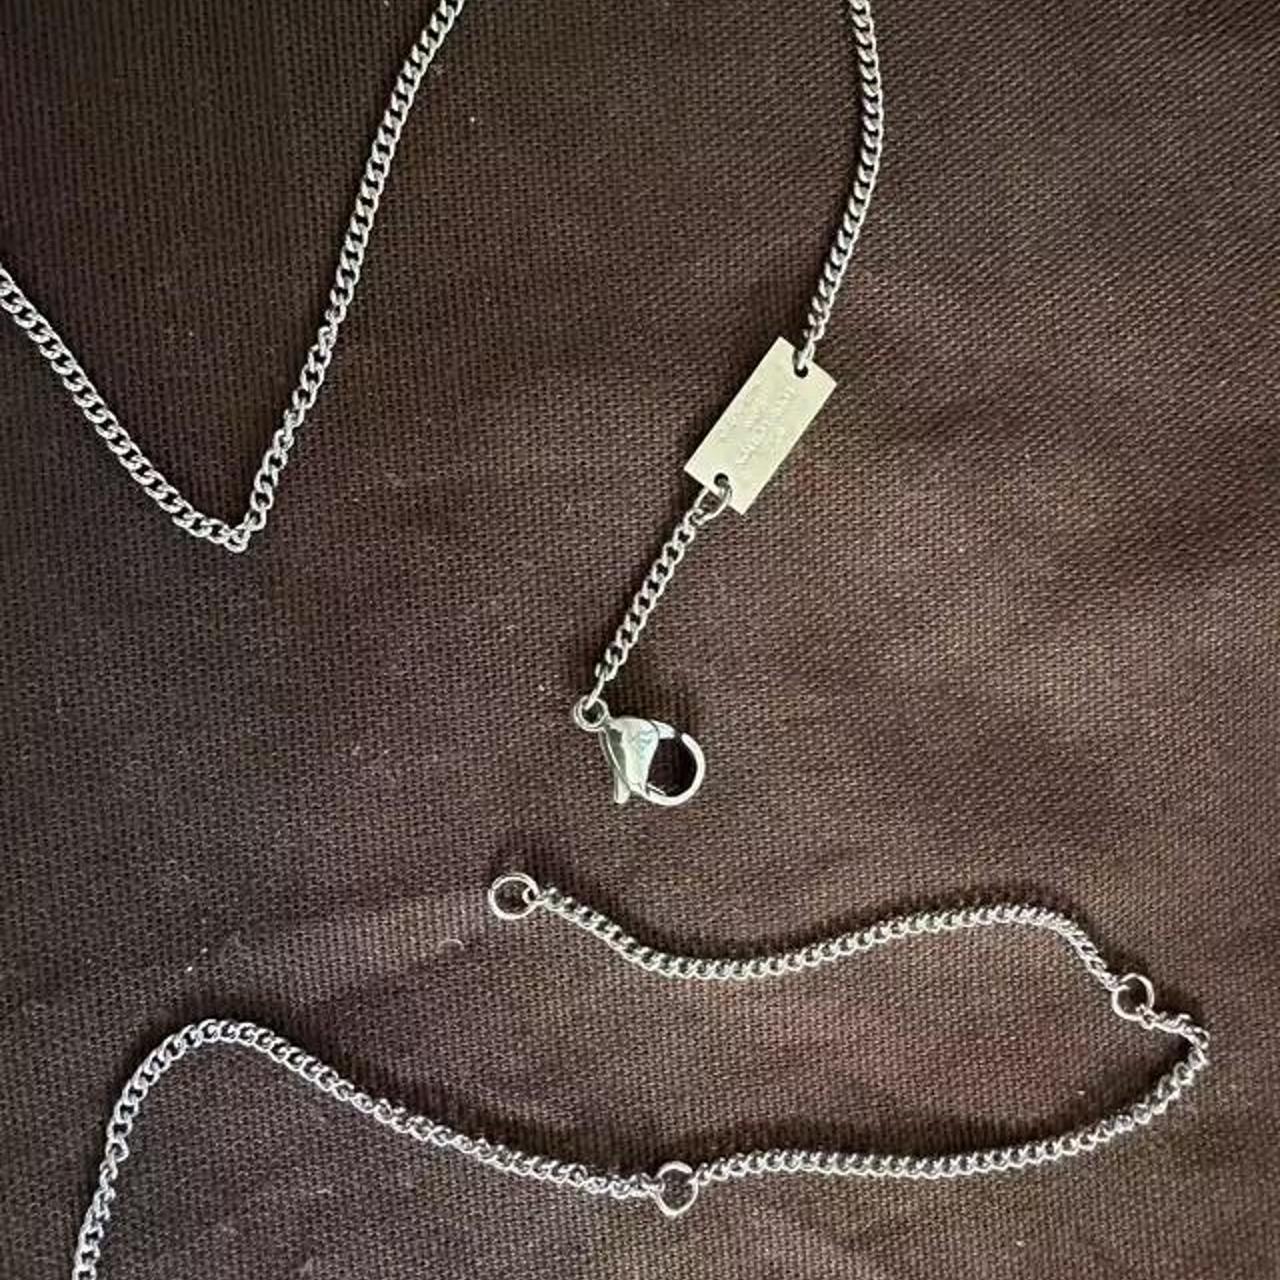 /LOUIS VUITTON CHAIN LINKS PATCHES NECKLACE/ /Weared - Depop